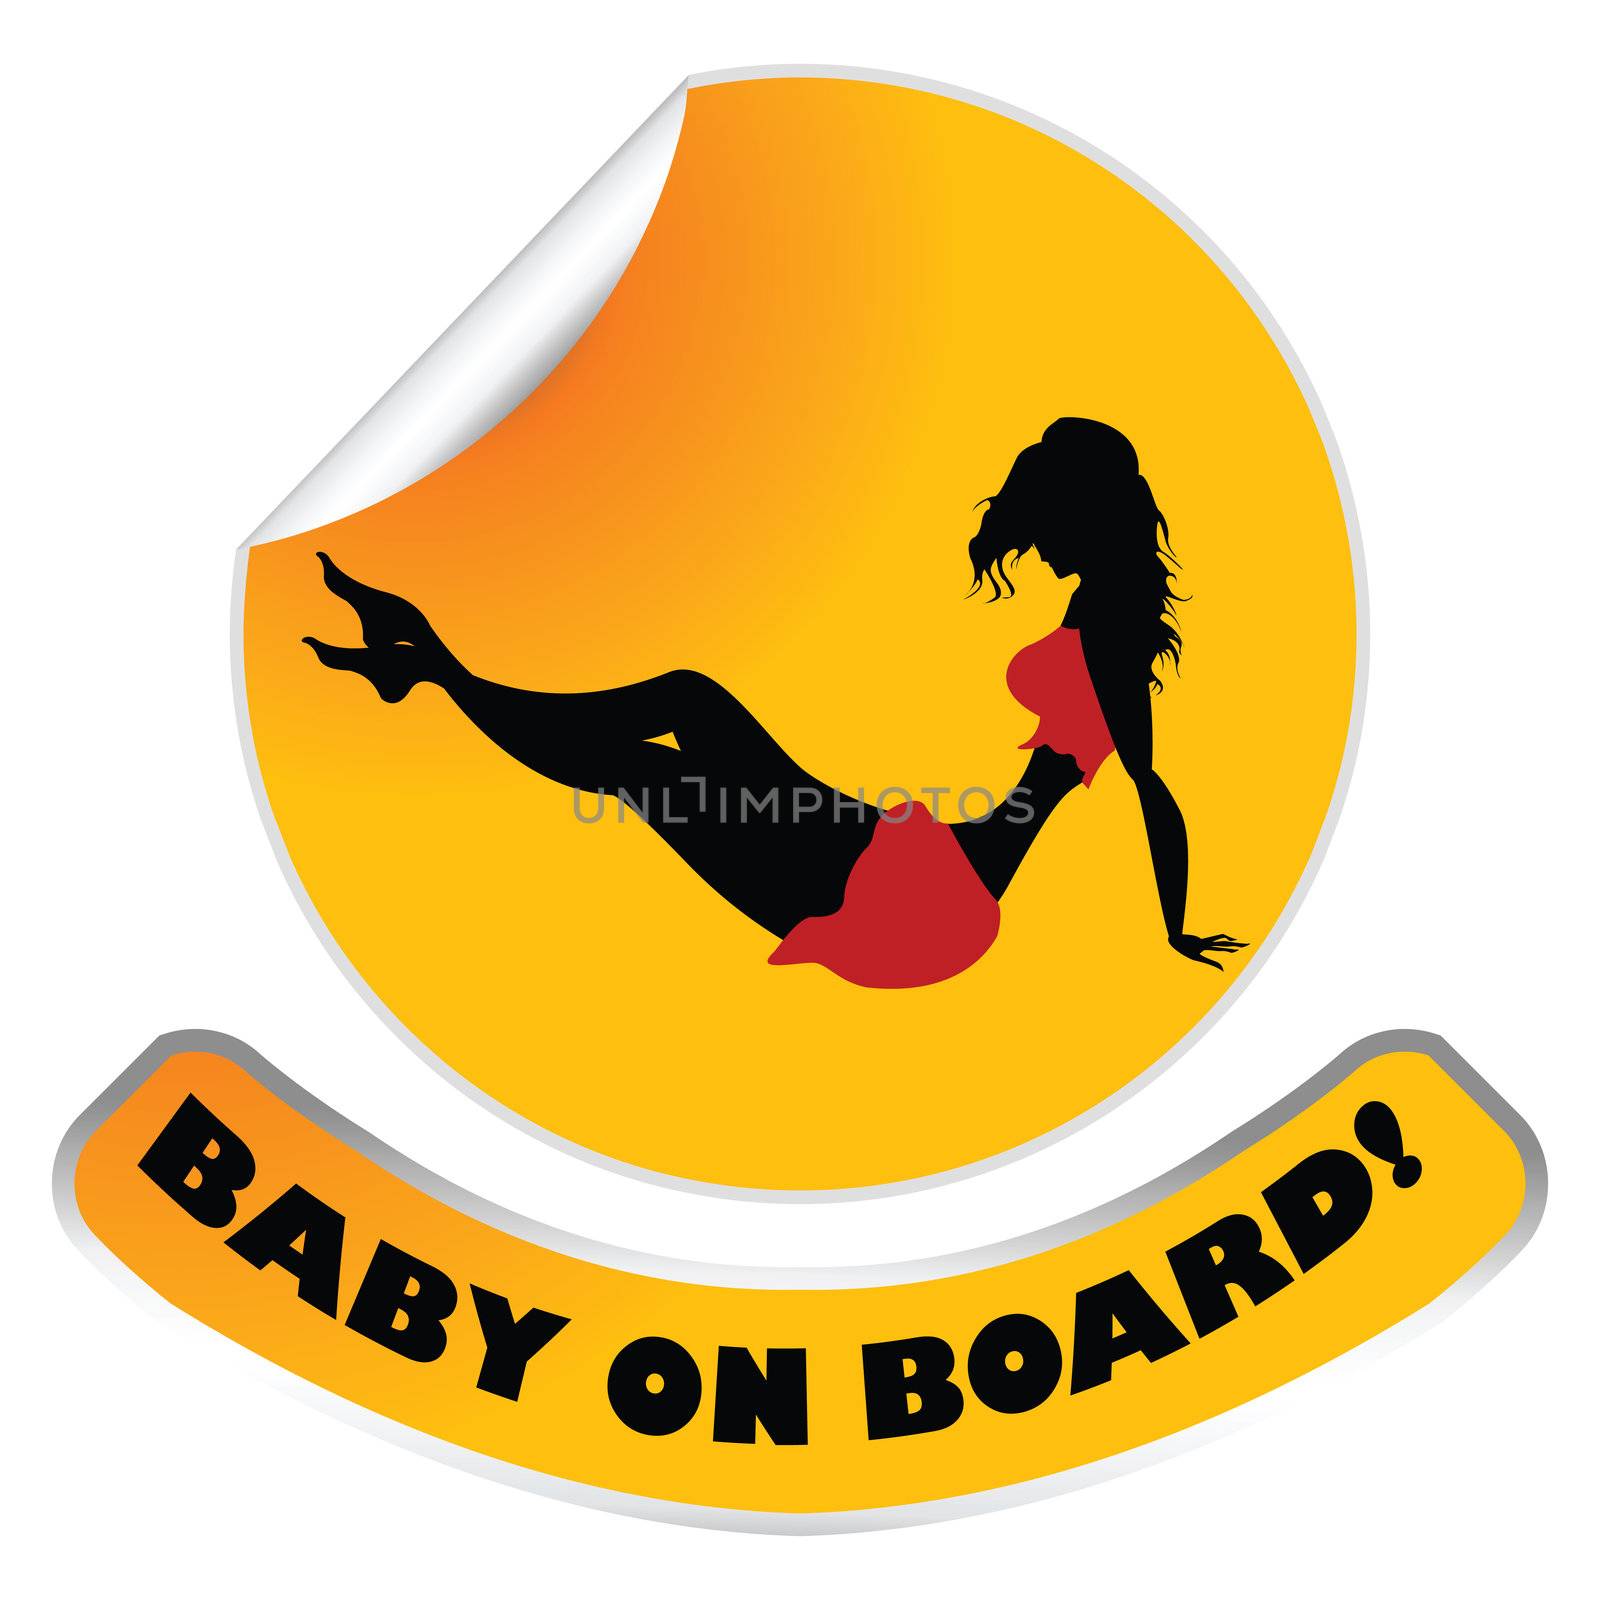 Window sticker with baby (ironic) on board